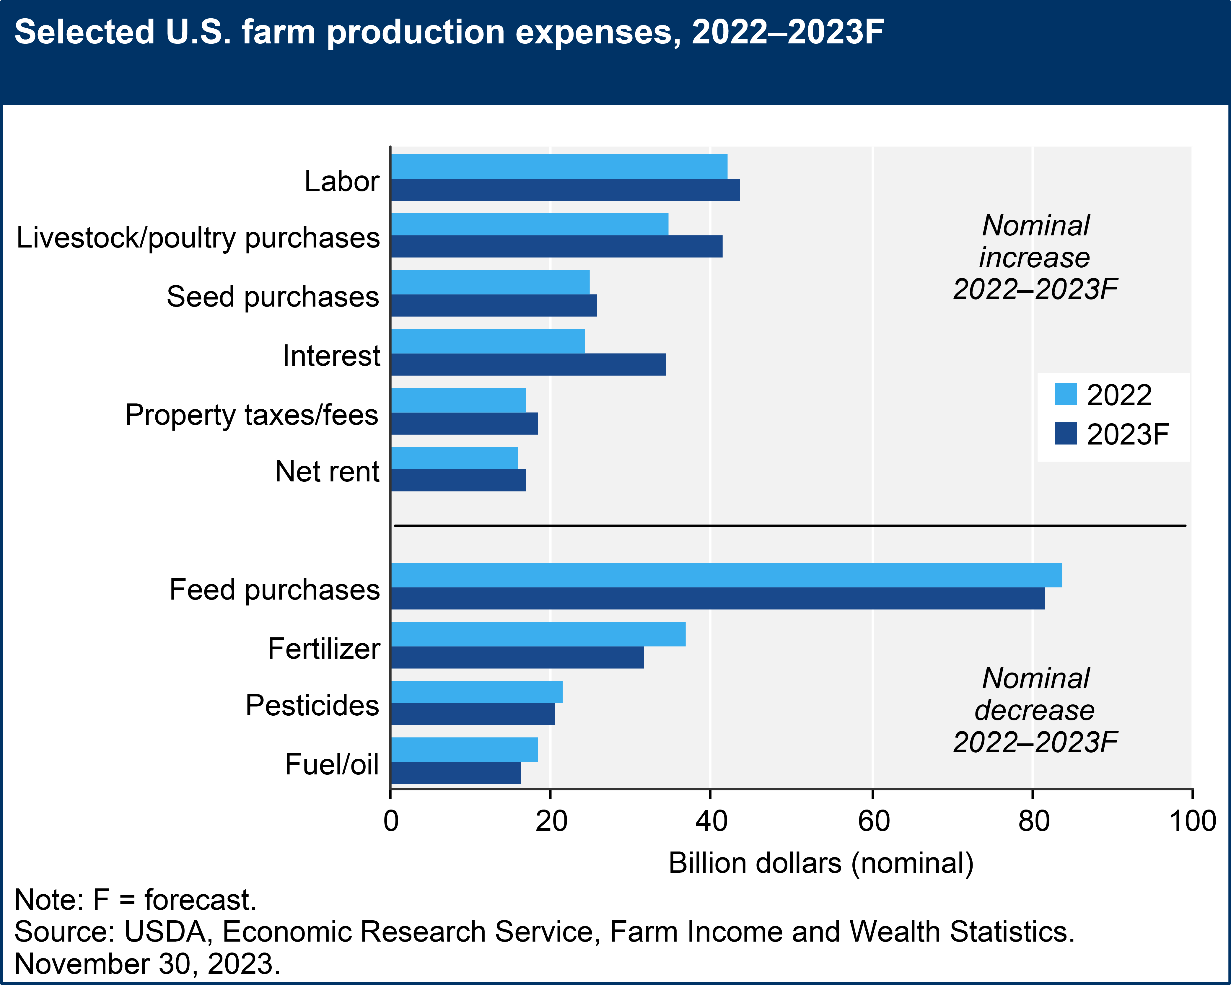 Selected farm production expenses with nominal increases from 2022-23 include labor, livestock, seed, interest, taxes, and rents. Expense categories with nominal decreases from 2022 to 2023 include feed, fertilizer, pesticides, and fuel. 